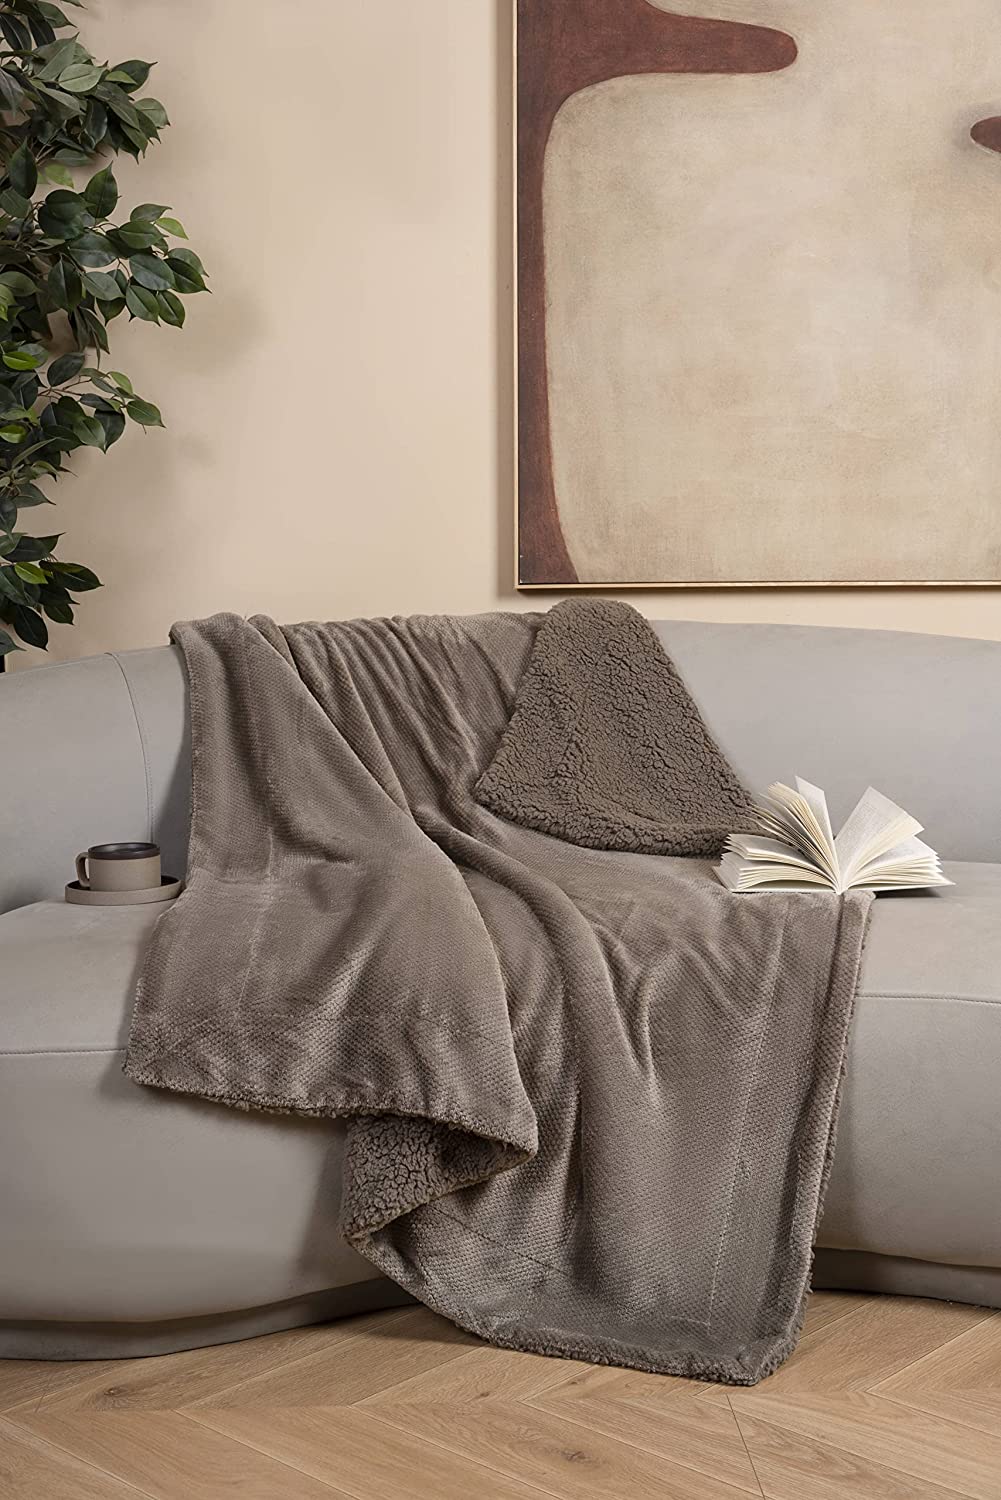 Sherpa Soft Throw & Blanket for Couch 60 inch X 50 inch, Thick Warm Fuzzy Cozy Throws Blankets for Bed, Sofa and Travel, Reversible Plush Fleece Blankets